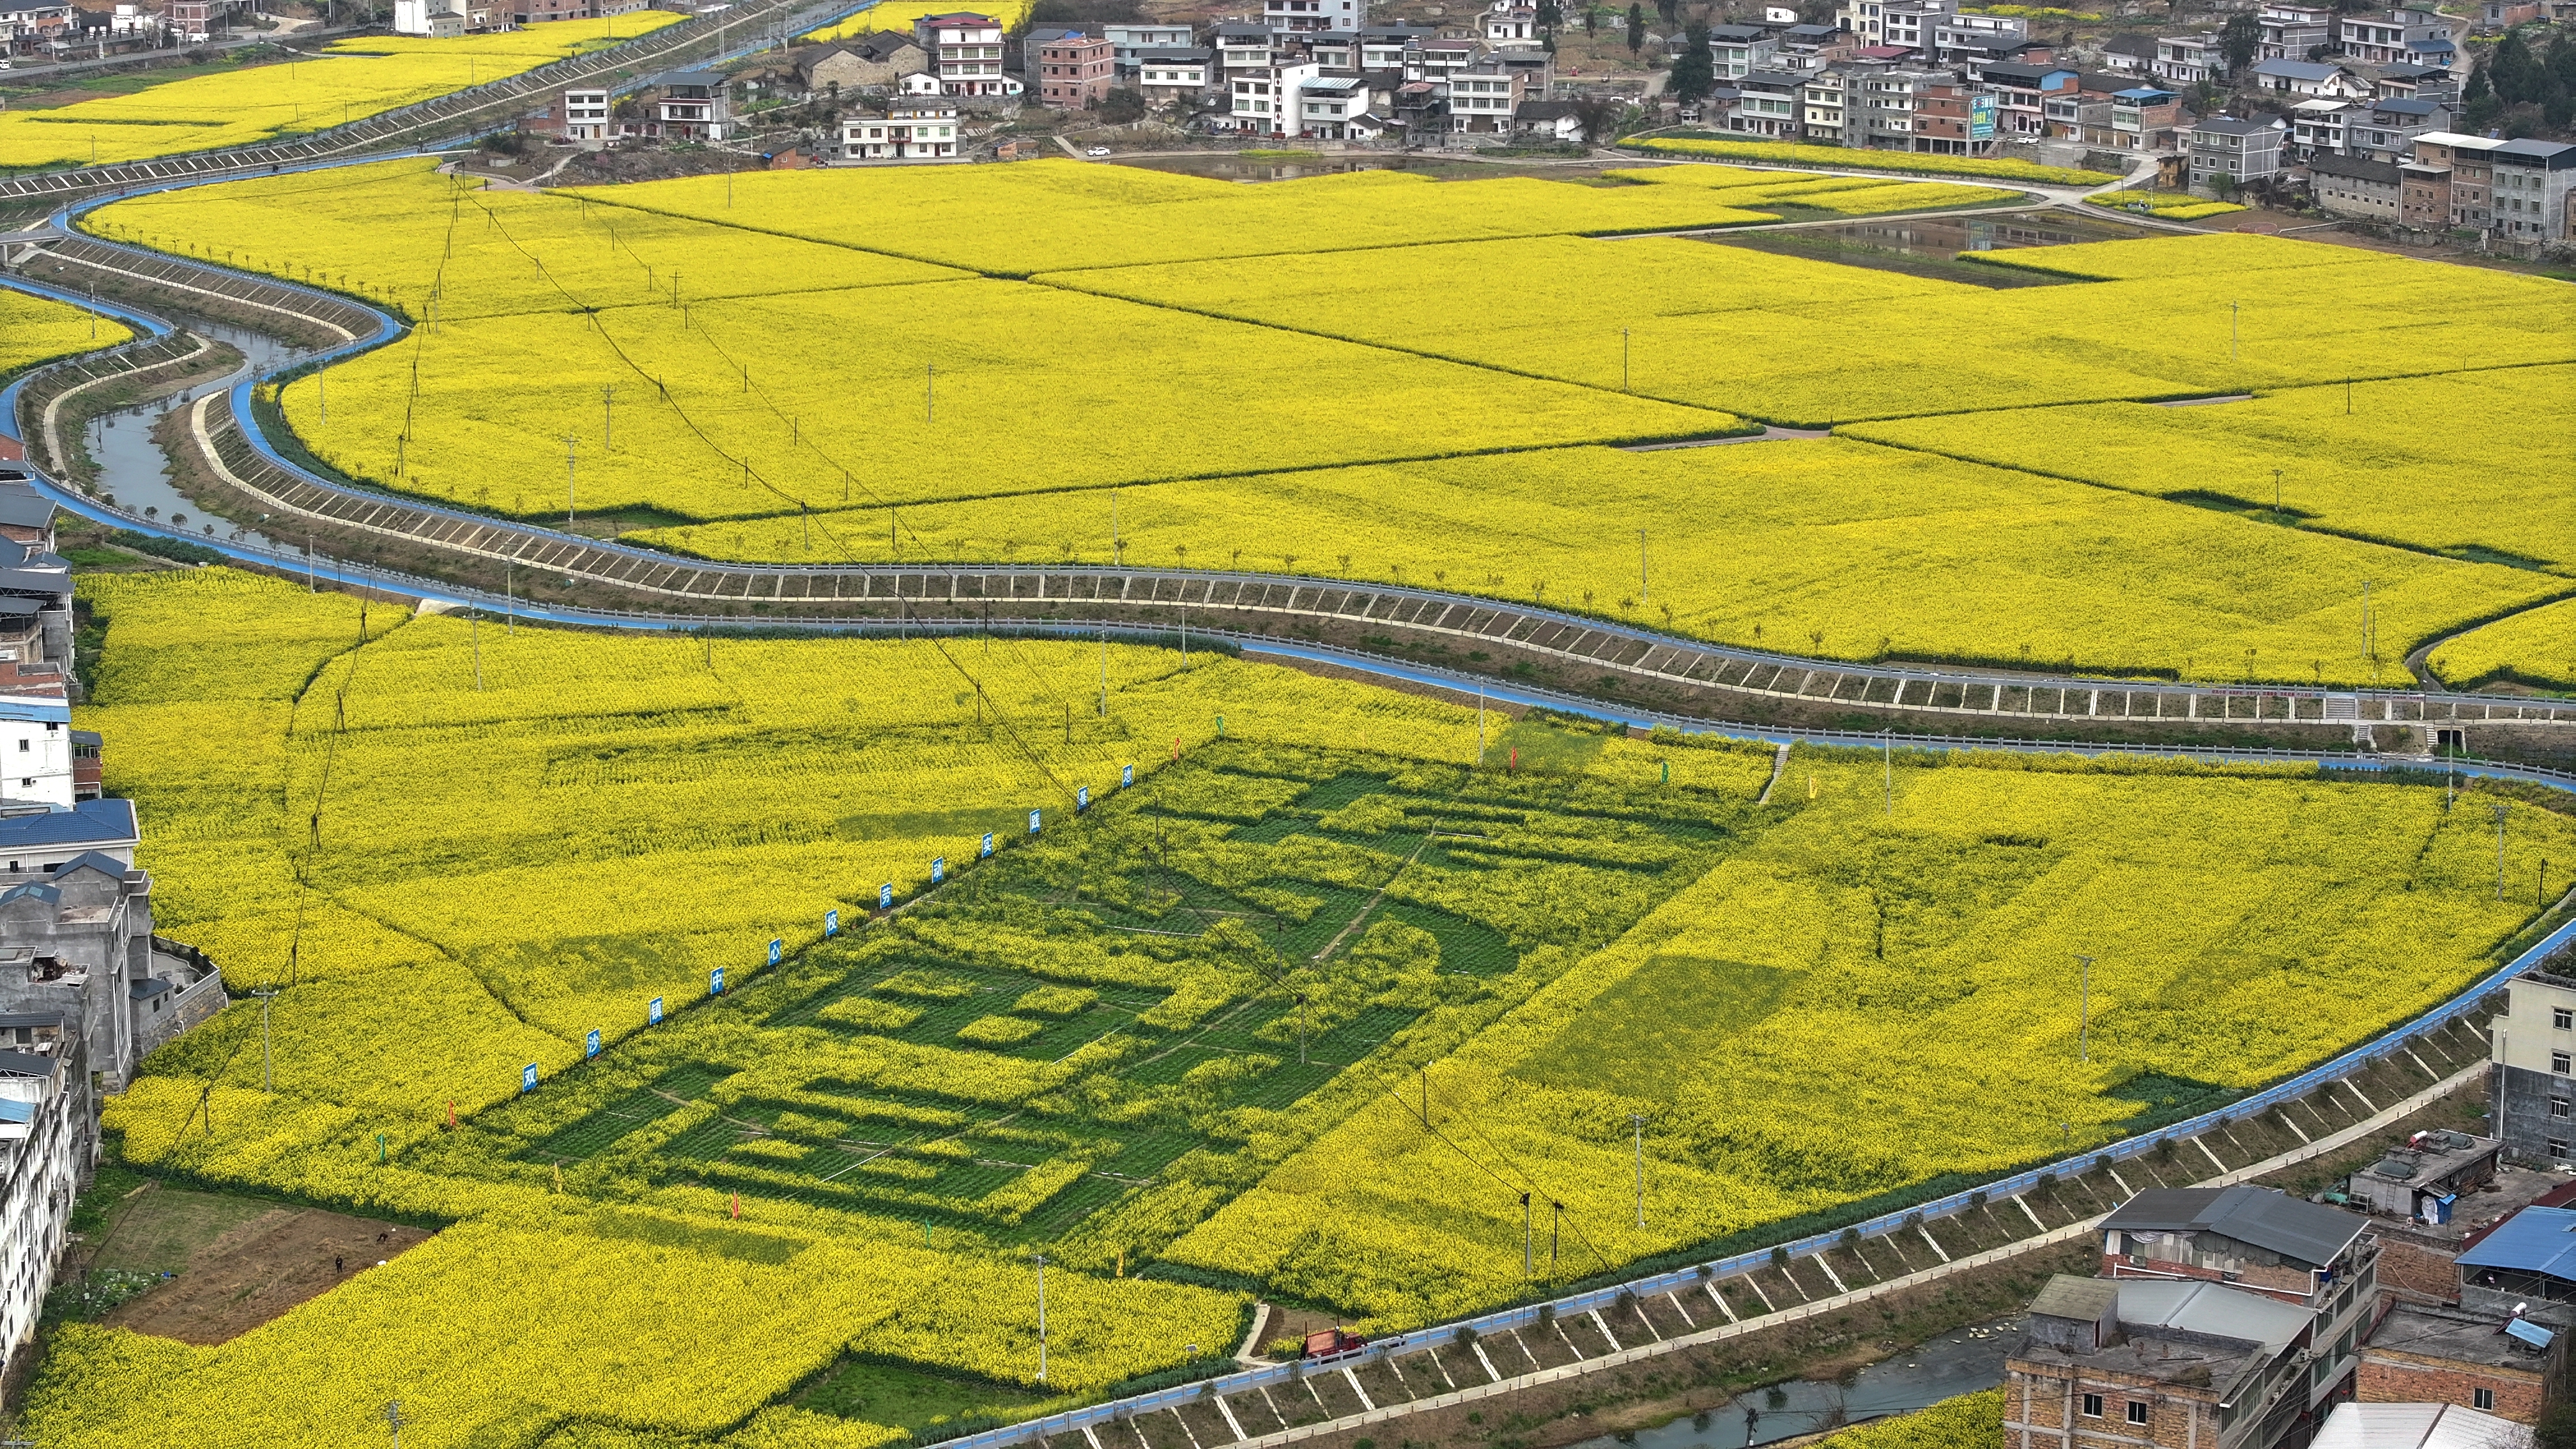 Blooming rapeseed flowers carpet the valley fields of Gulin County, Sichuan Province. /Photo by Liu Langtao
